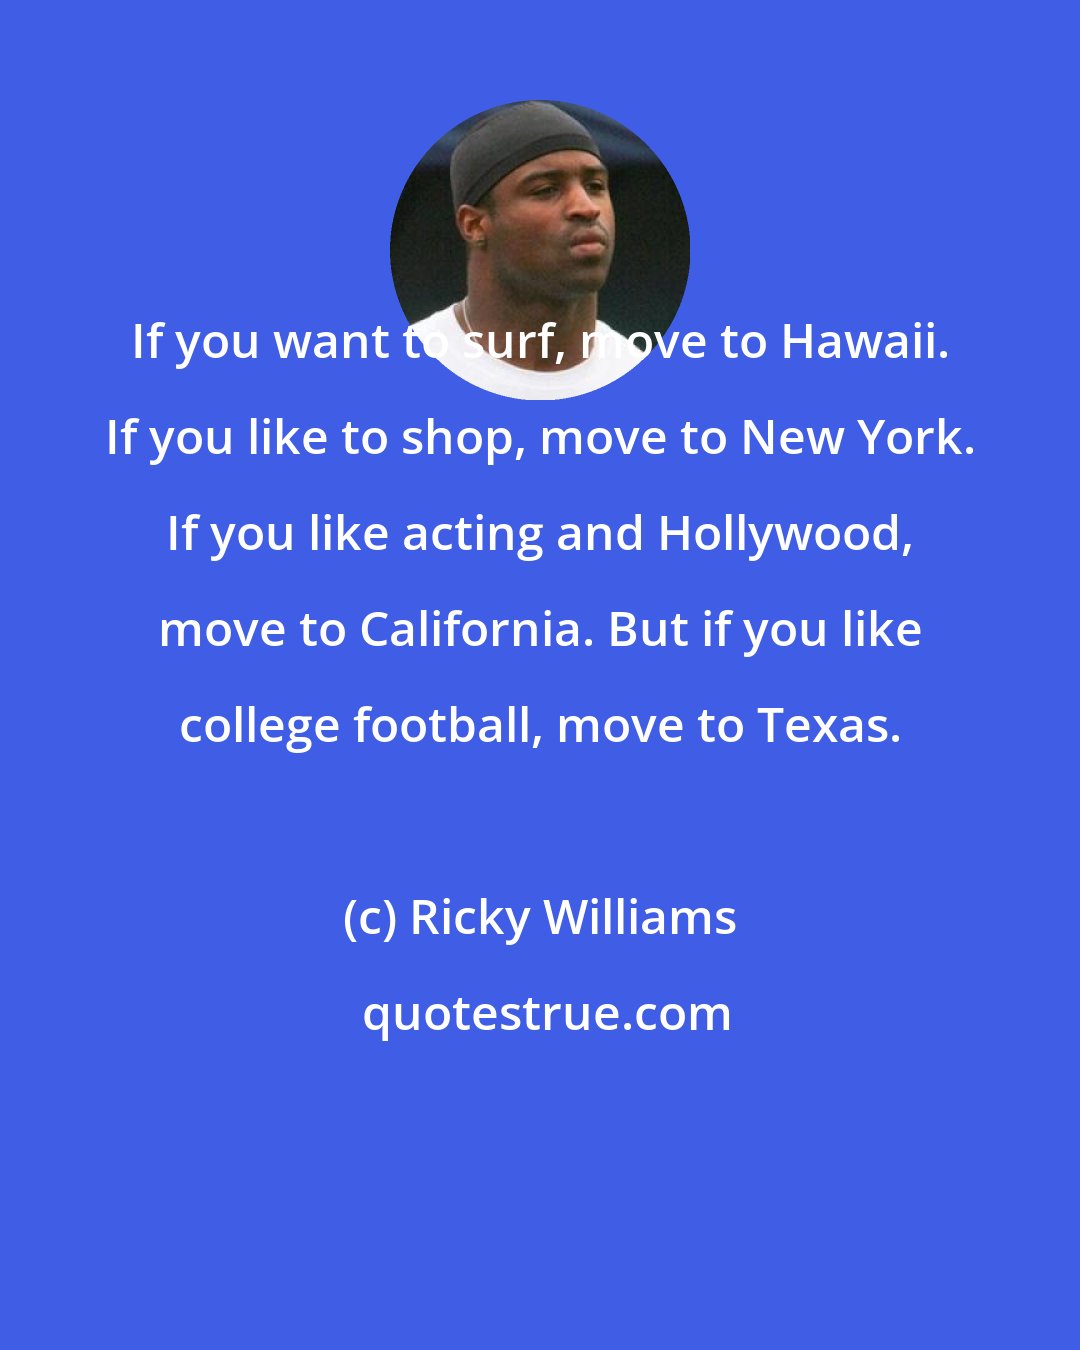 Ricky Williams: If you want to surf, move to Hawaii. If you like to shop, move to New York. If you like acting and Hollywood, move to California. But if you like college football, move to Texas.